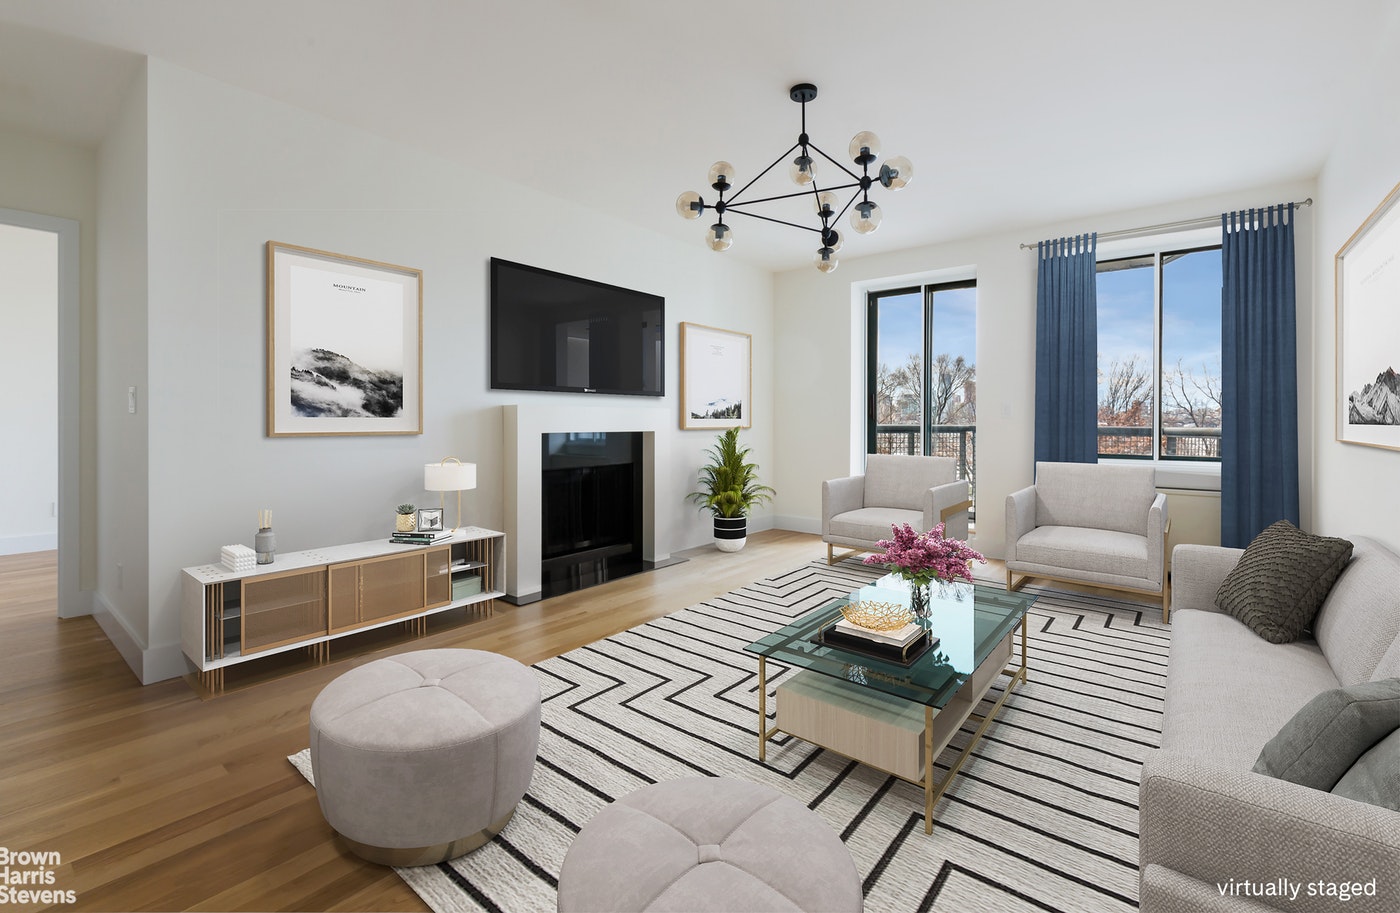 What to make of virtually staged listings | amNewYork